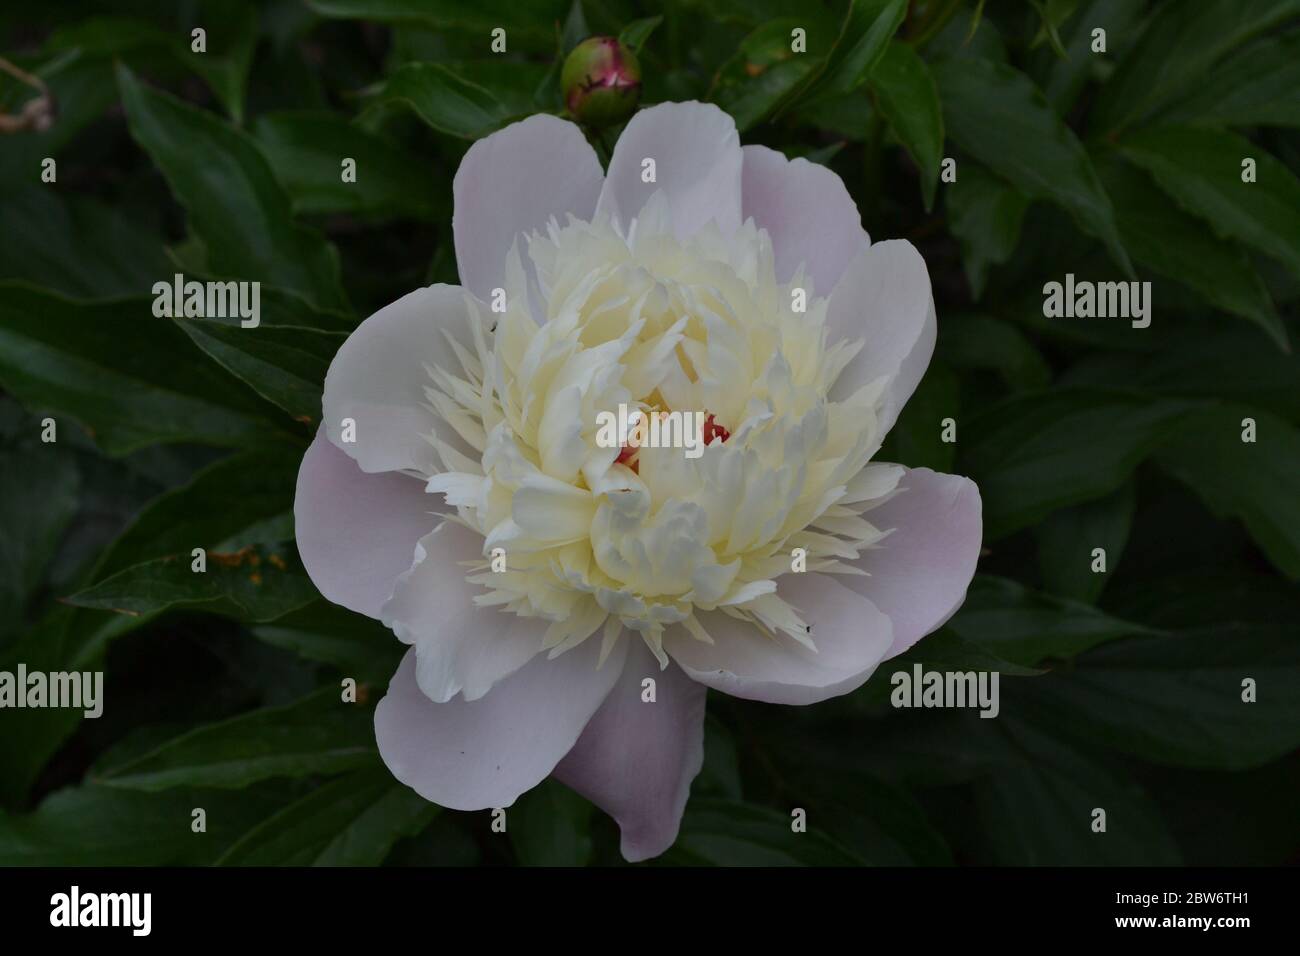 Home garden, flower bed. Gardening. House, field, farm. Green leaves, bushes. Flower Peony. Paeonia, herbaceous perennials and deciduous shrubs. White Stock Photo